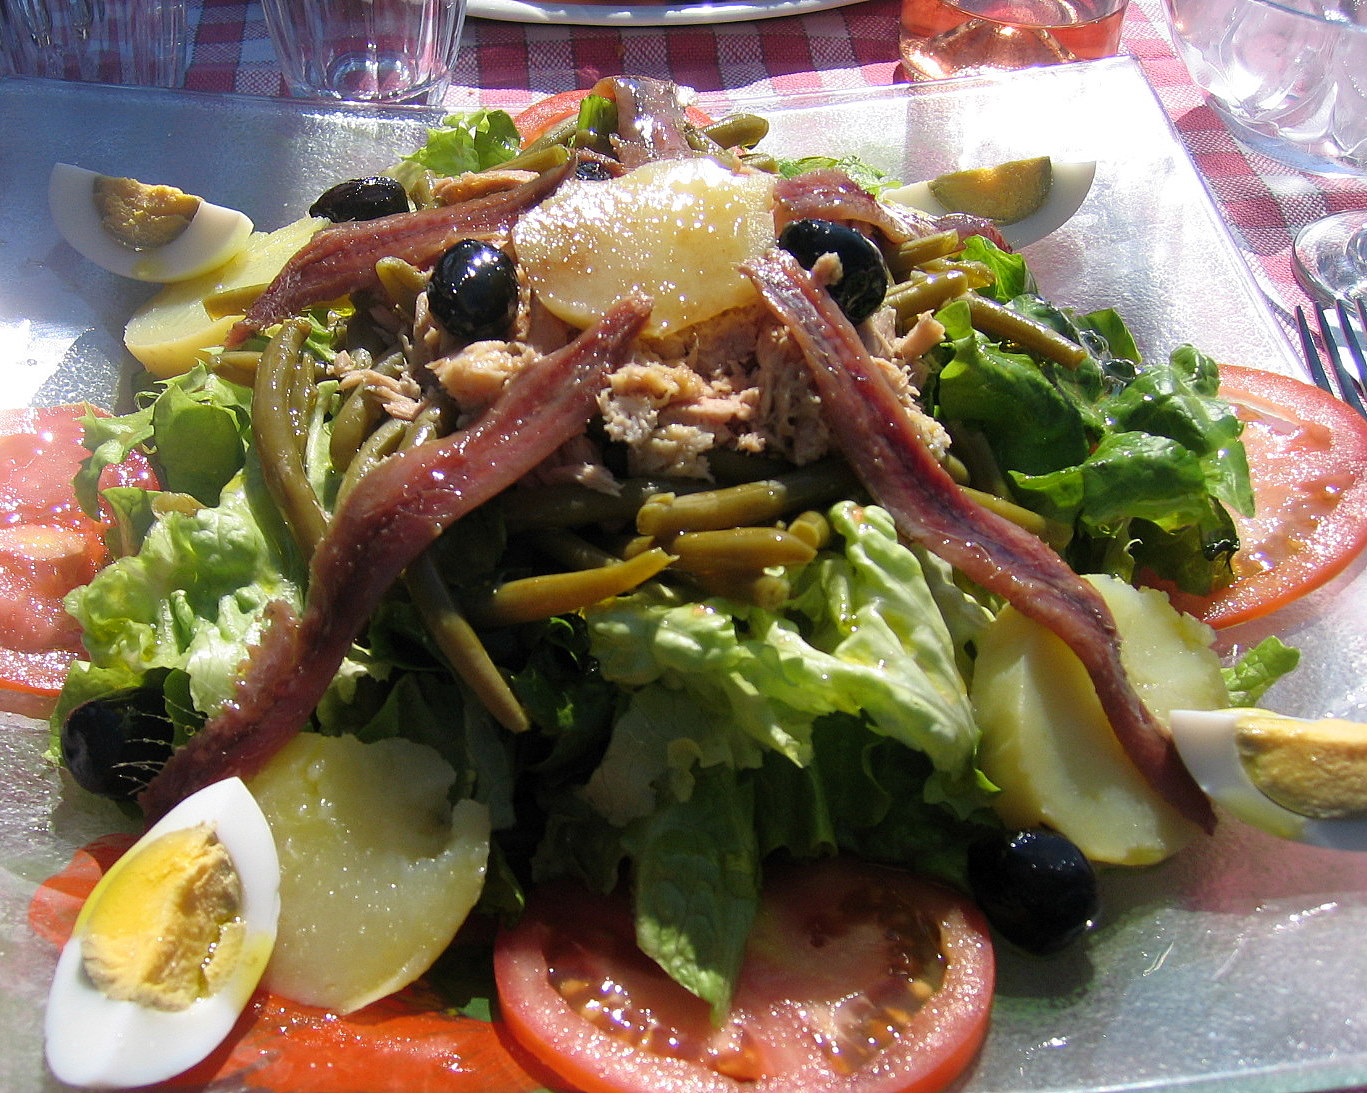 a salad with meat, cheese, and other vegetables is sitting on a plastic plate